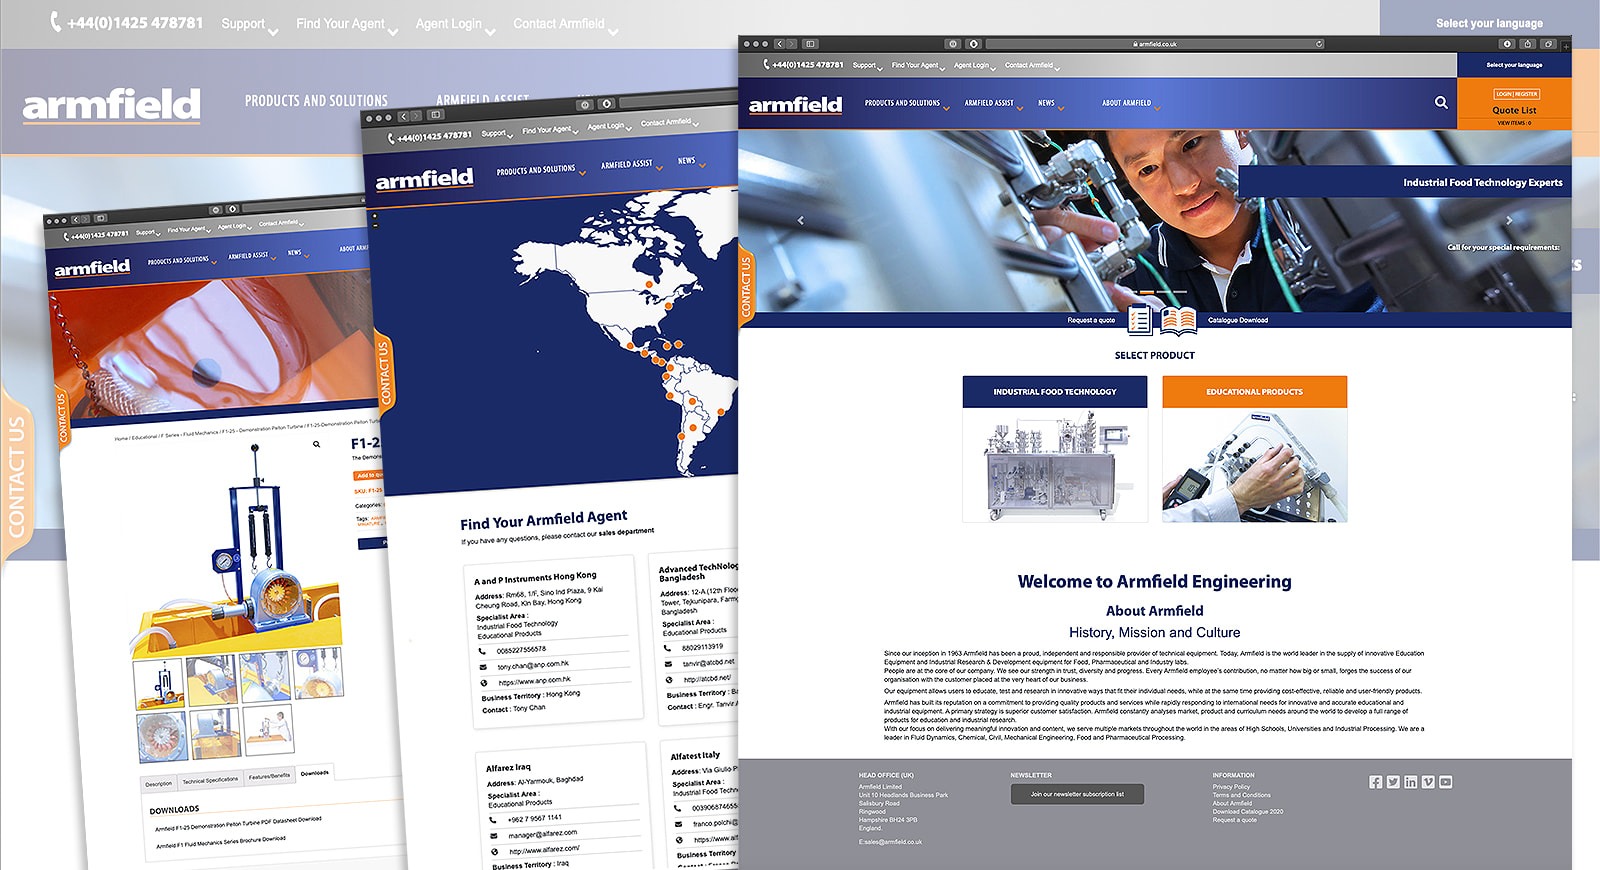 Armfield webpages